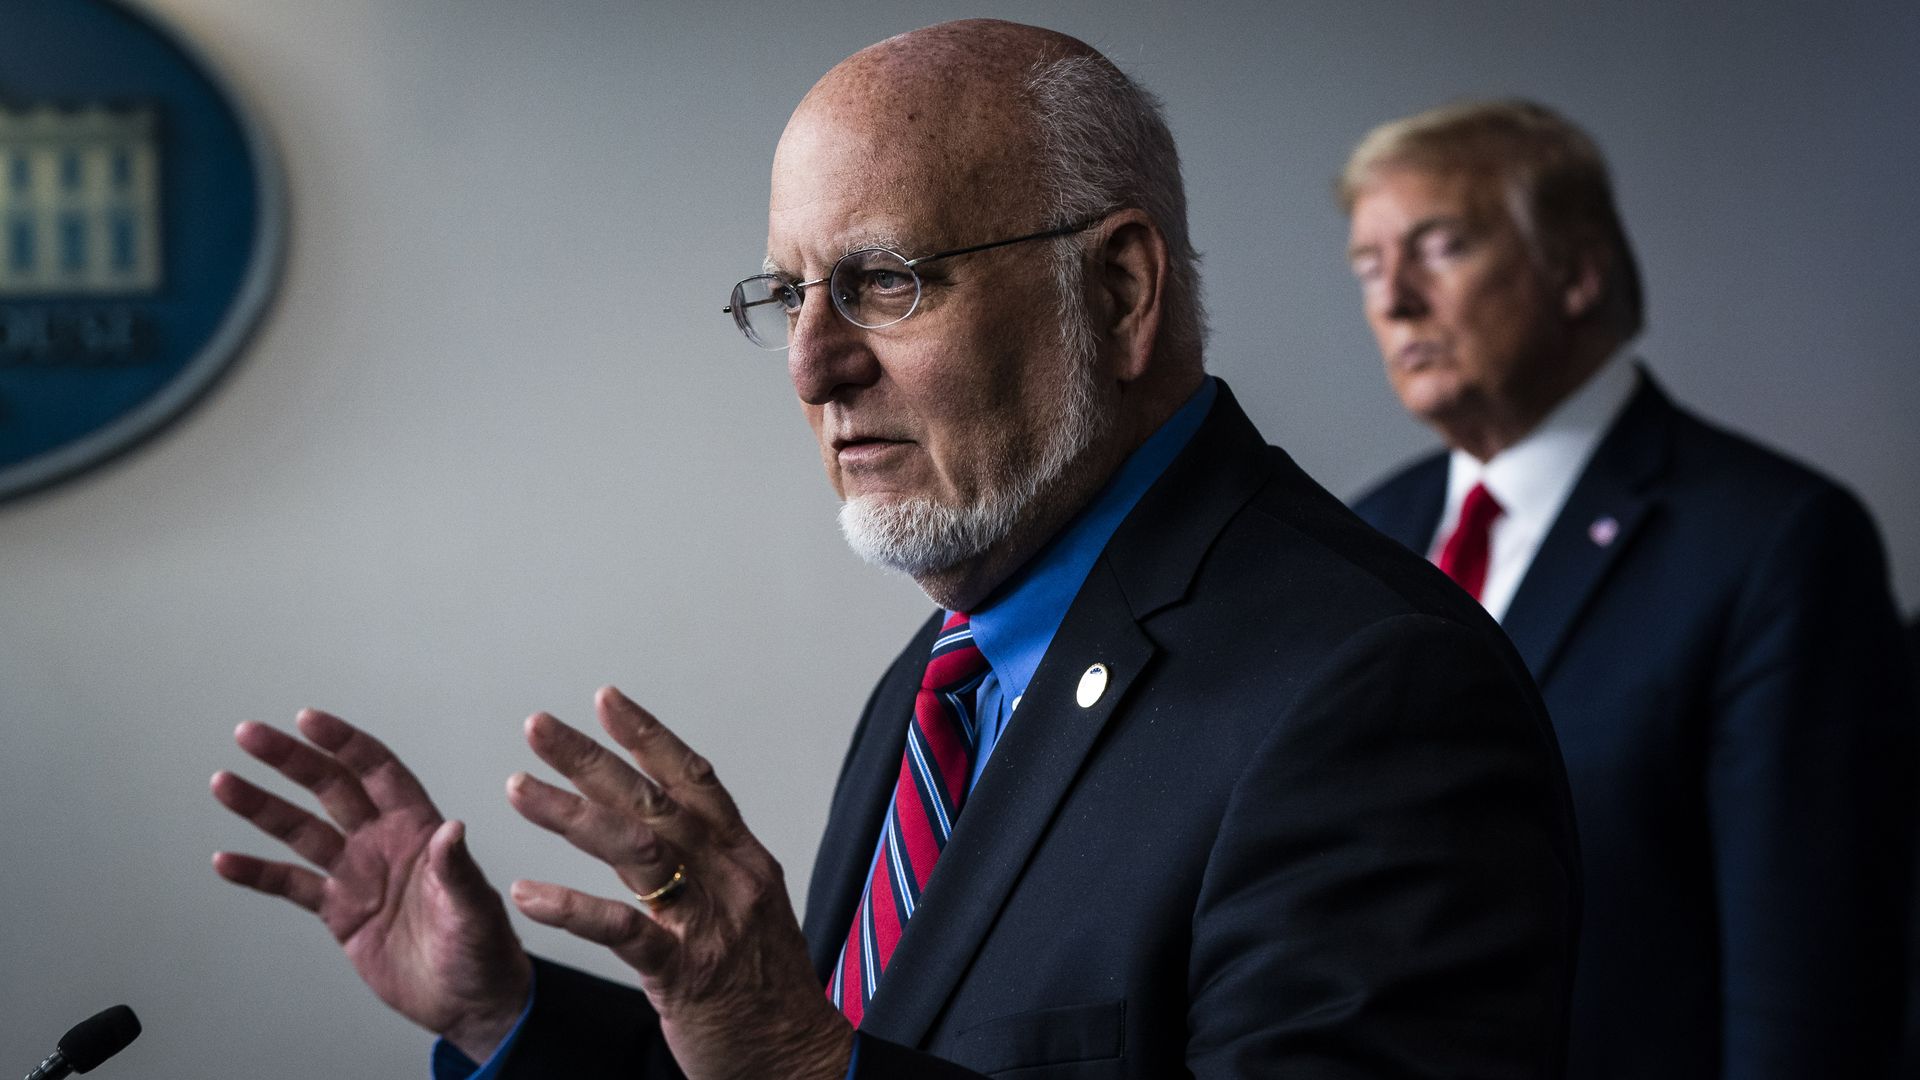 In this image, Trump stands behind CDC director Robert Redfield